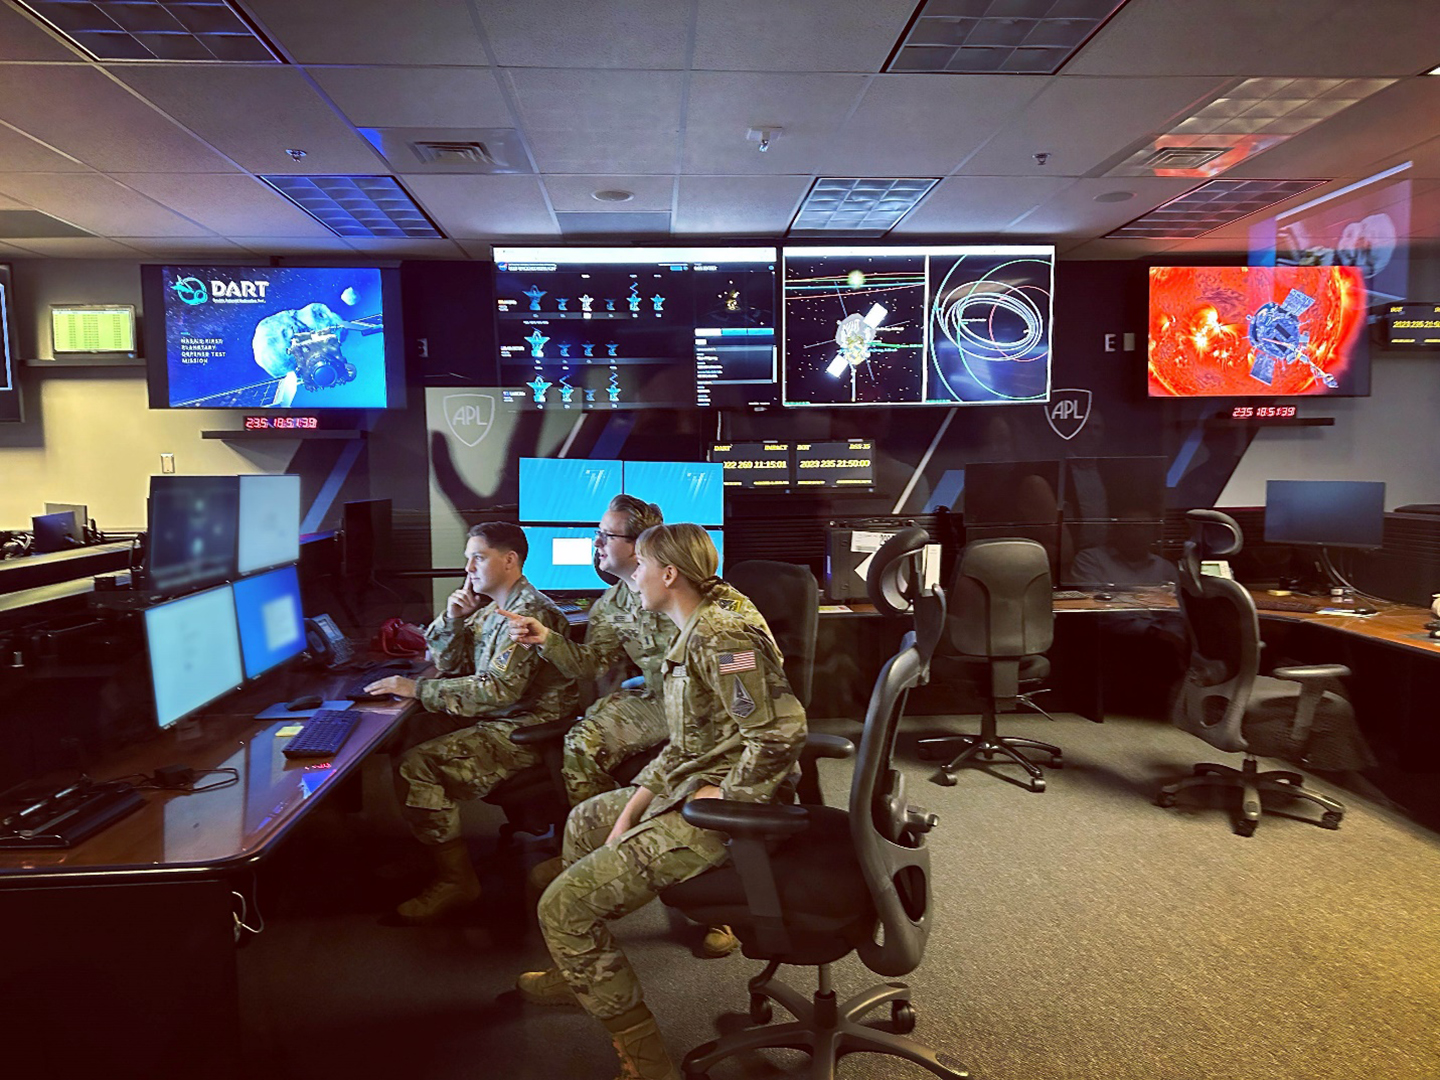 Three people wearing military camouflage uniforms sit at a desk and computer monitor. Several screens behind them list other NASA missions, including DART and Parker Solar Probe